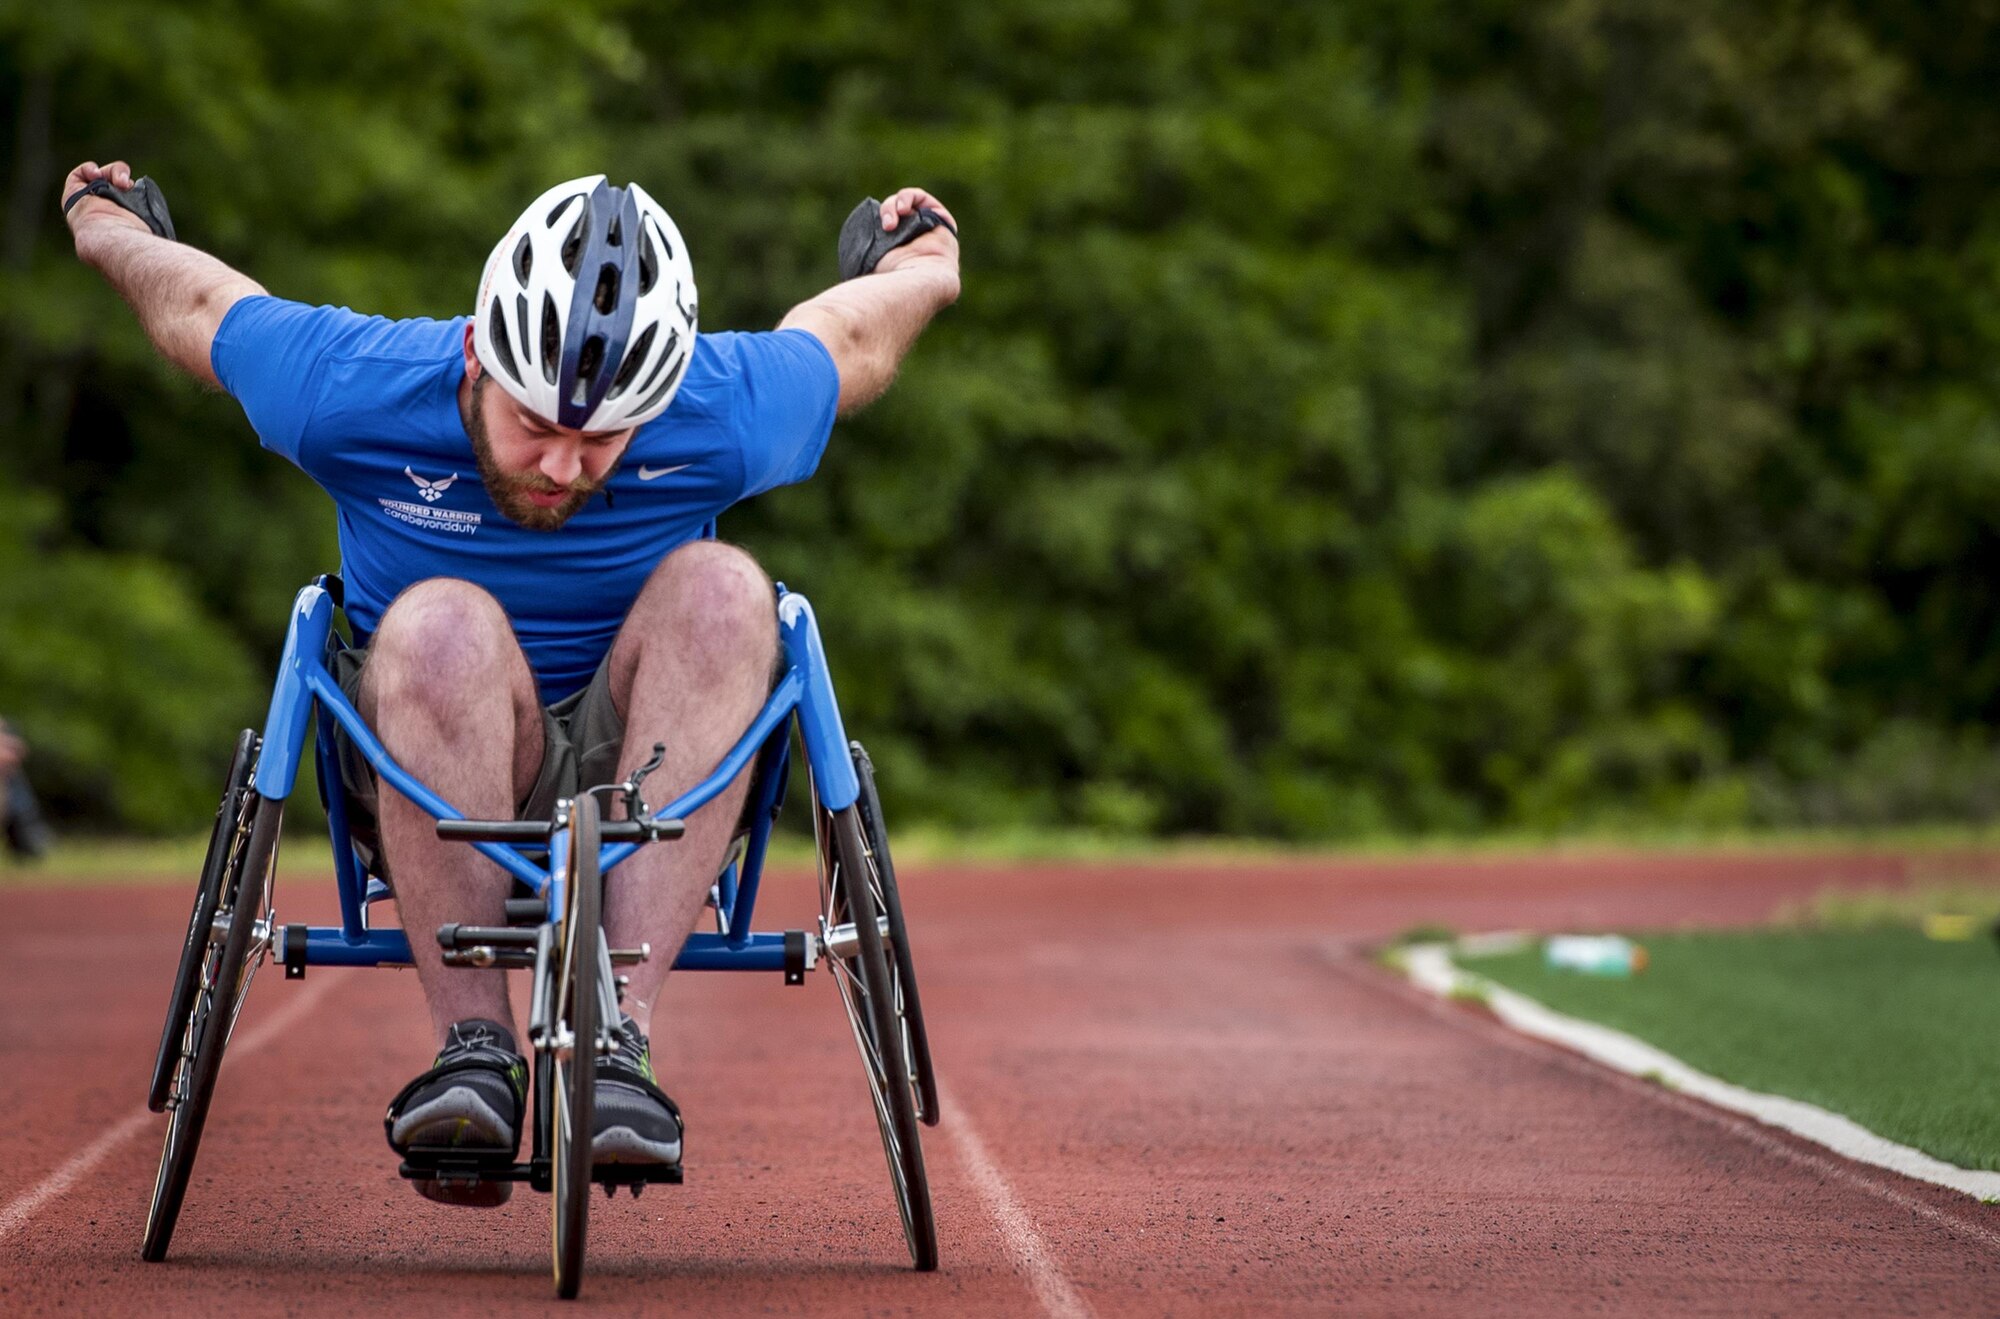 Airman 1st Class John Lemoine, a Warrior Games athlete, pushes through a roll in his sports chair a morning track and field session at the Air Force team’s training camp at Eglin Air Force Base, Fla., April 24. The base-hosted, week-long Warrior Games training camp is the last team practice session before the yearly competition in June. (U.S. Air Force photo/Samuel King Jr.)